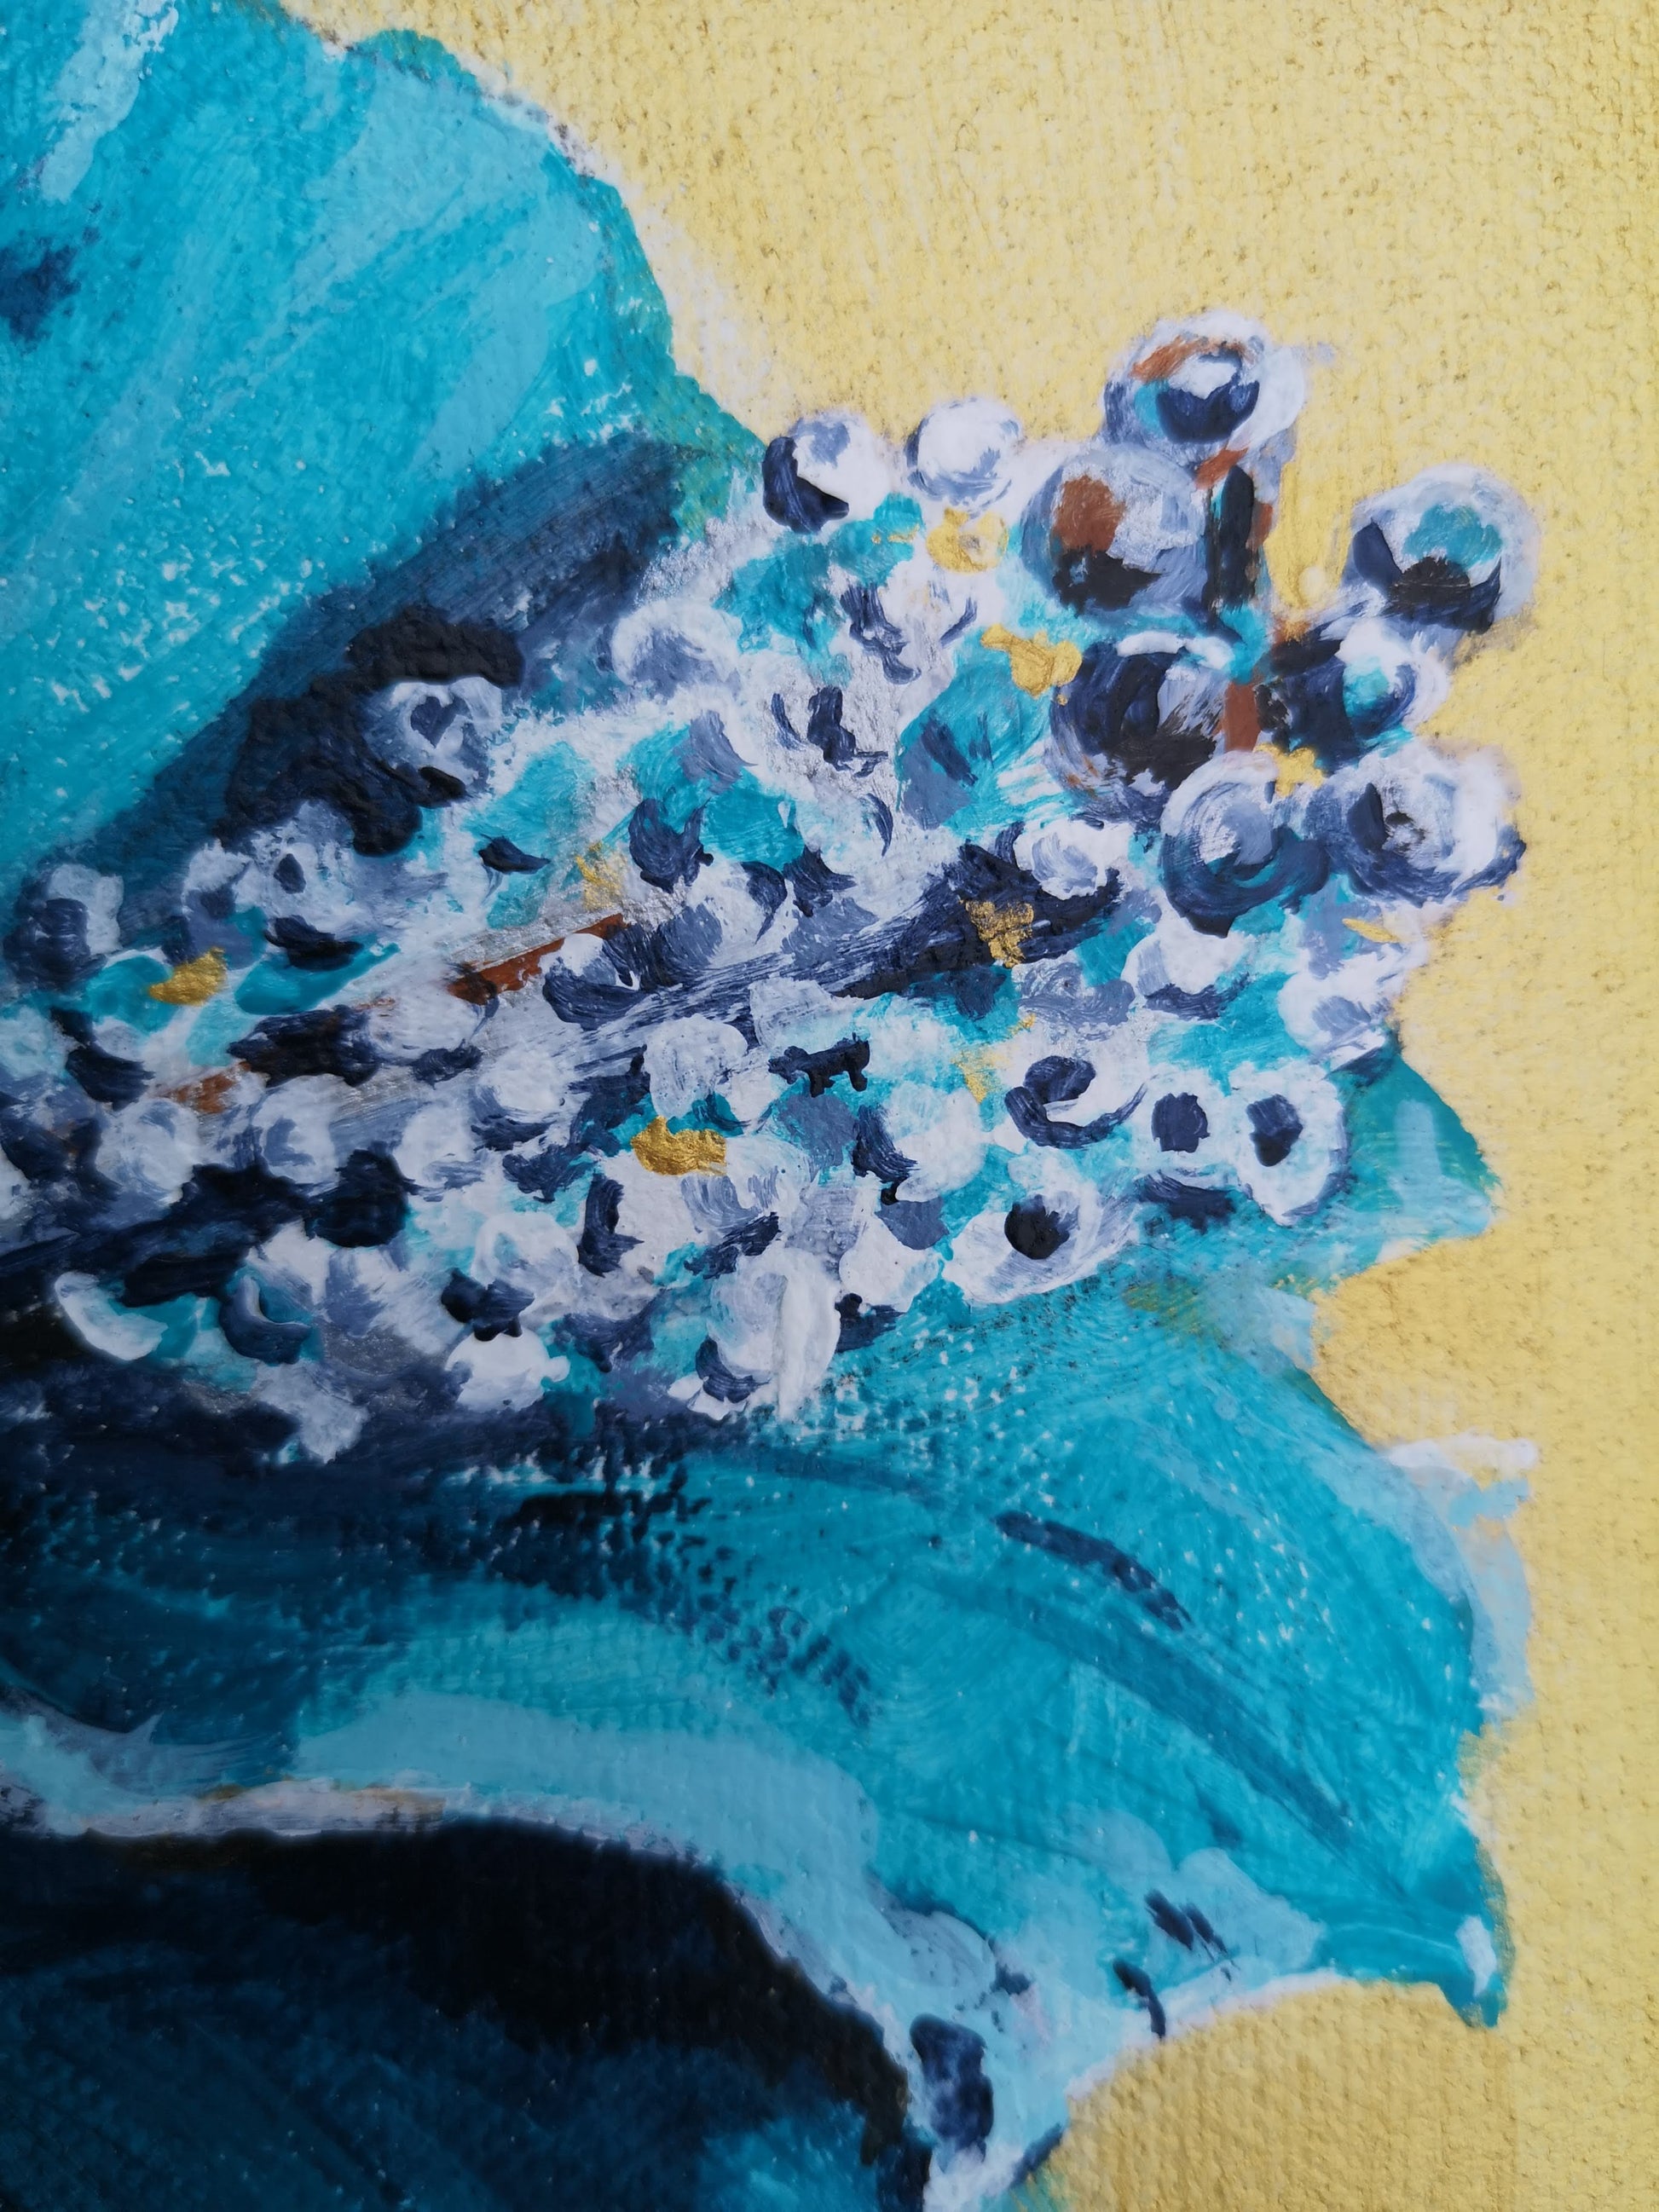 Details of gold turquoise flower painting by Judy Century Art original wall painting